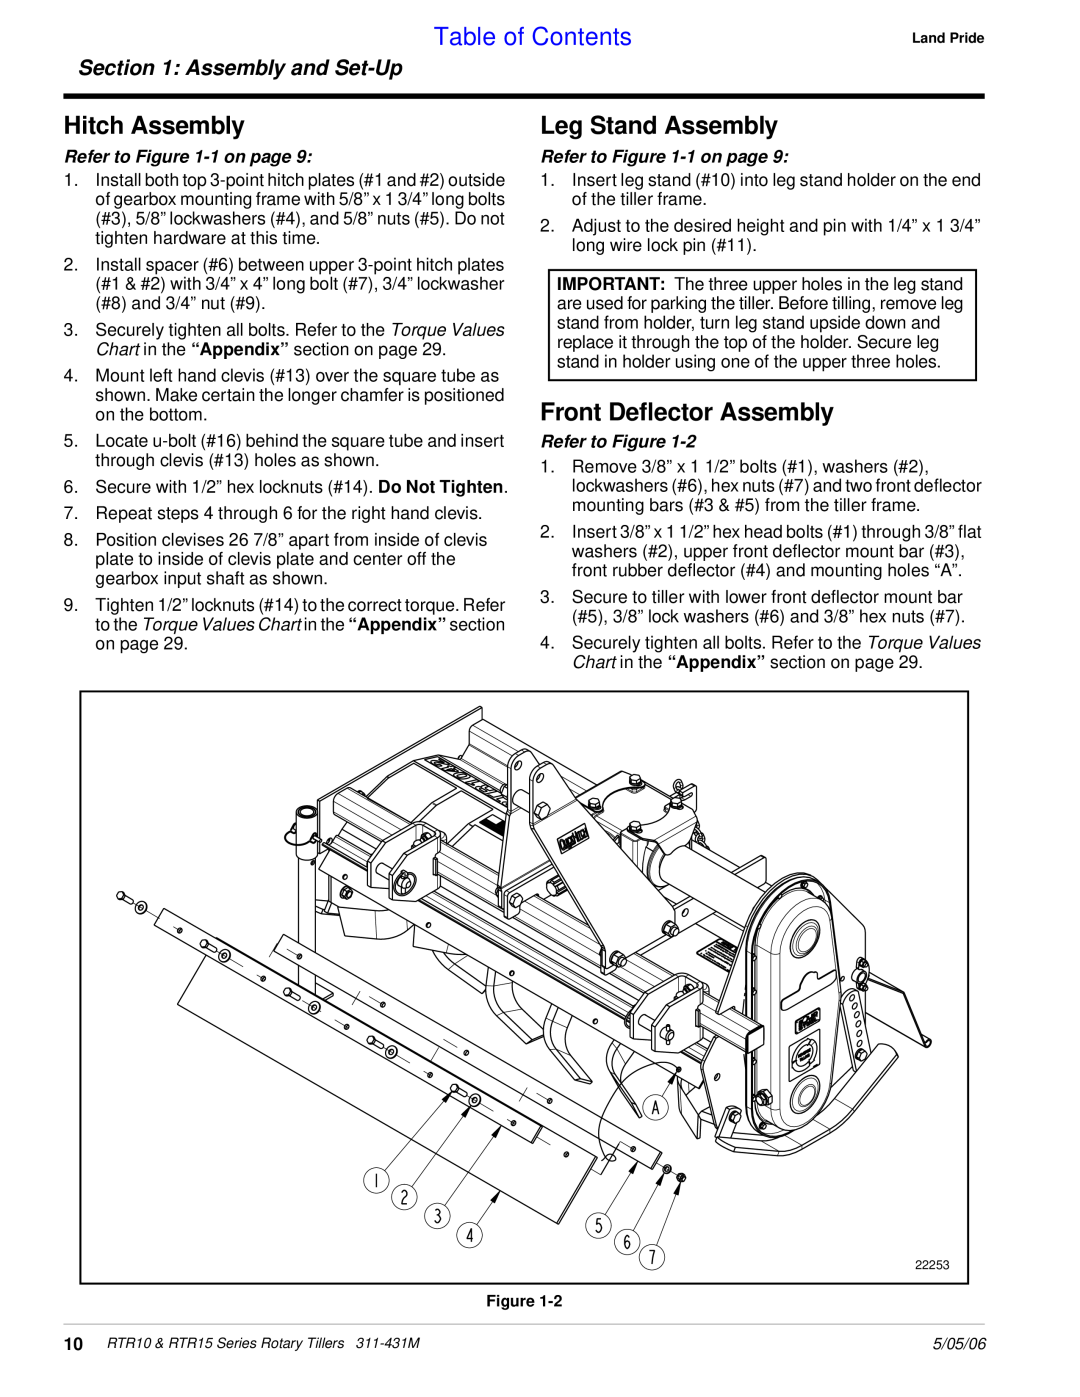 Land Pride RTR1550 Hitch Assembly, Leg Stand Assembly, Front Deflector Assembly, Refer to -1 on page, Refer to Figure 